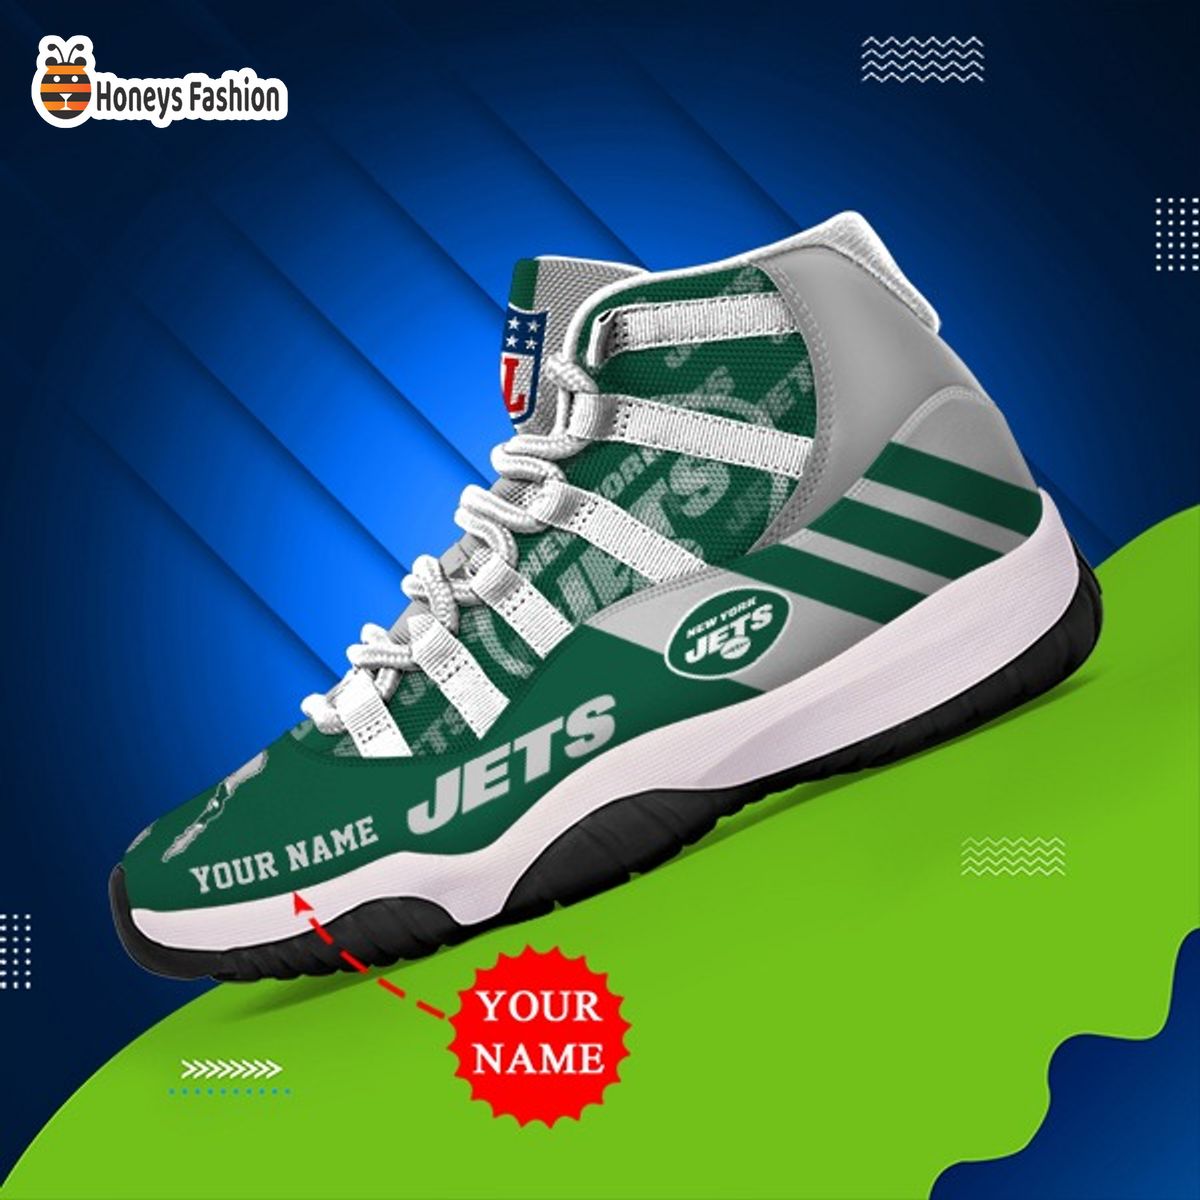 New York Jets NFL Adidas Personalized Air Jordan 11 Shoes